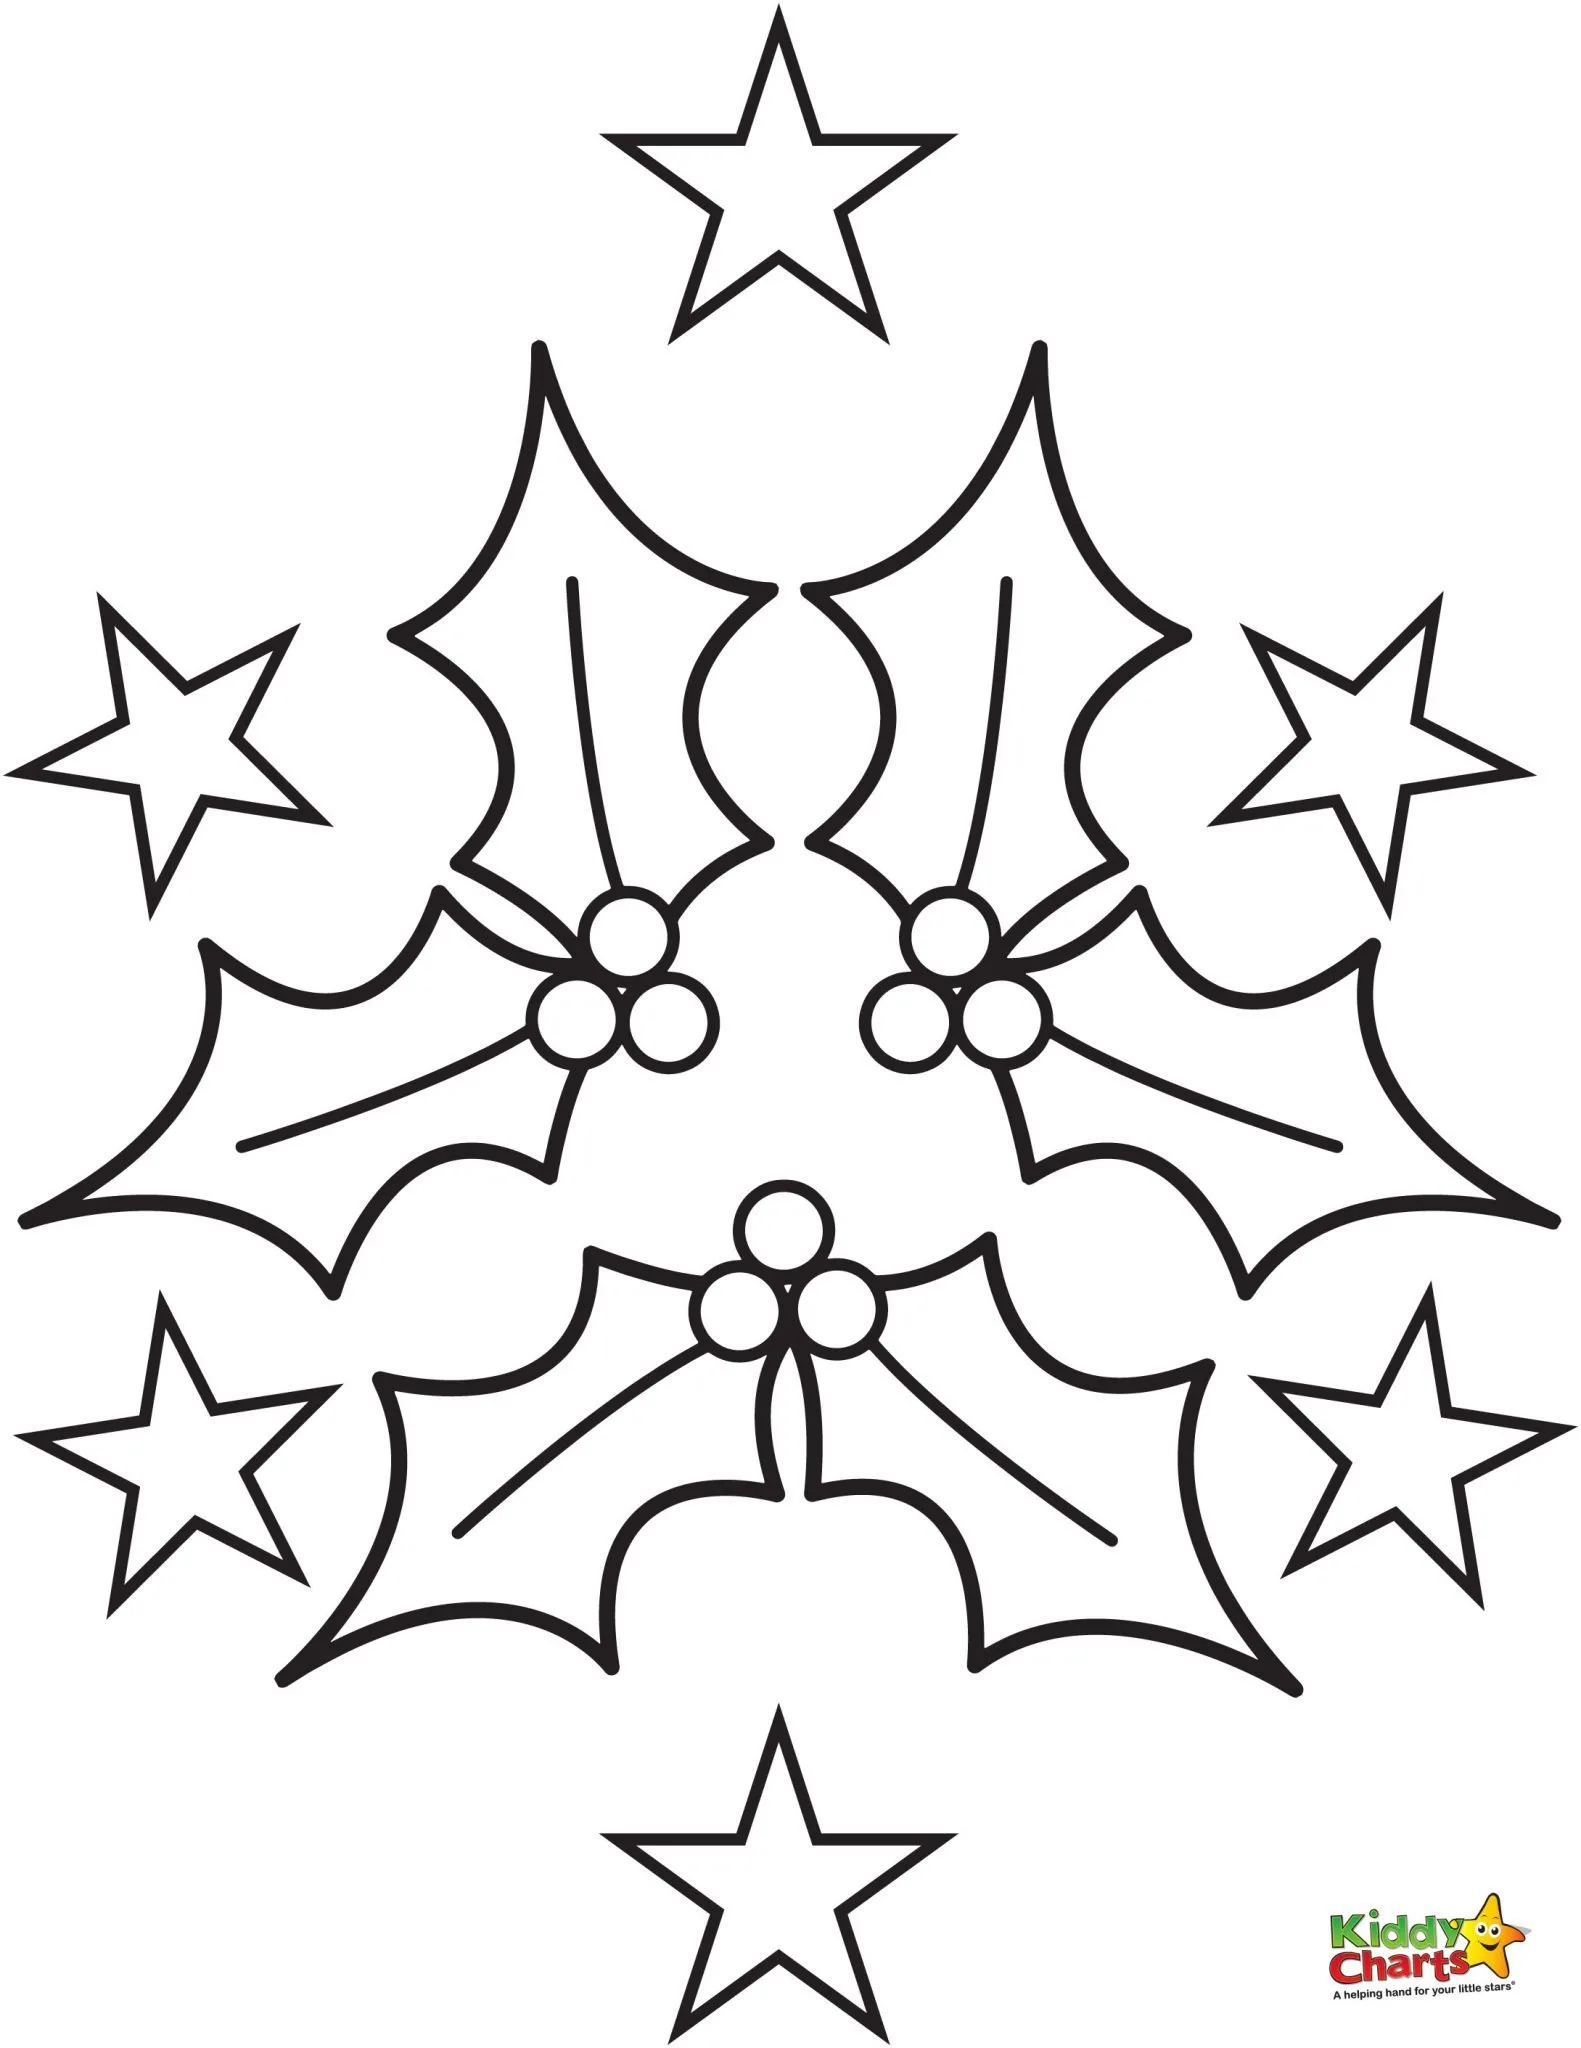 Holly Coloring Pages